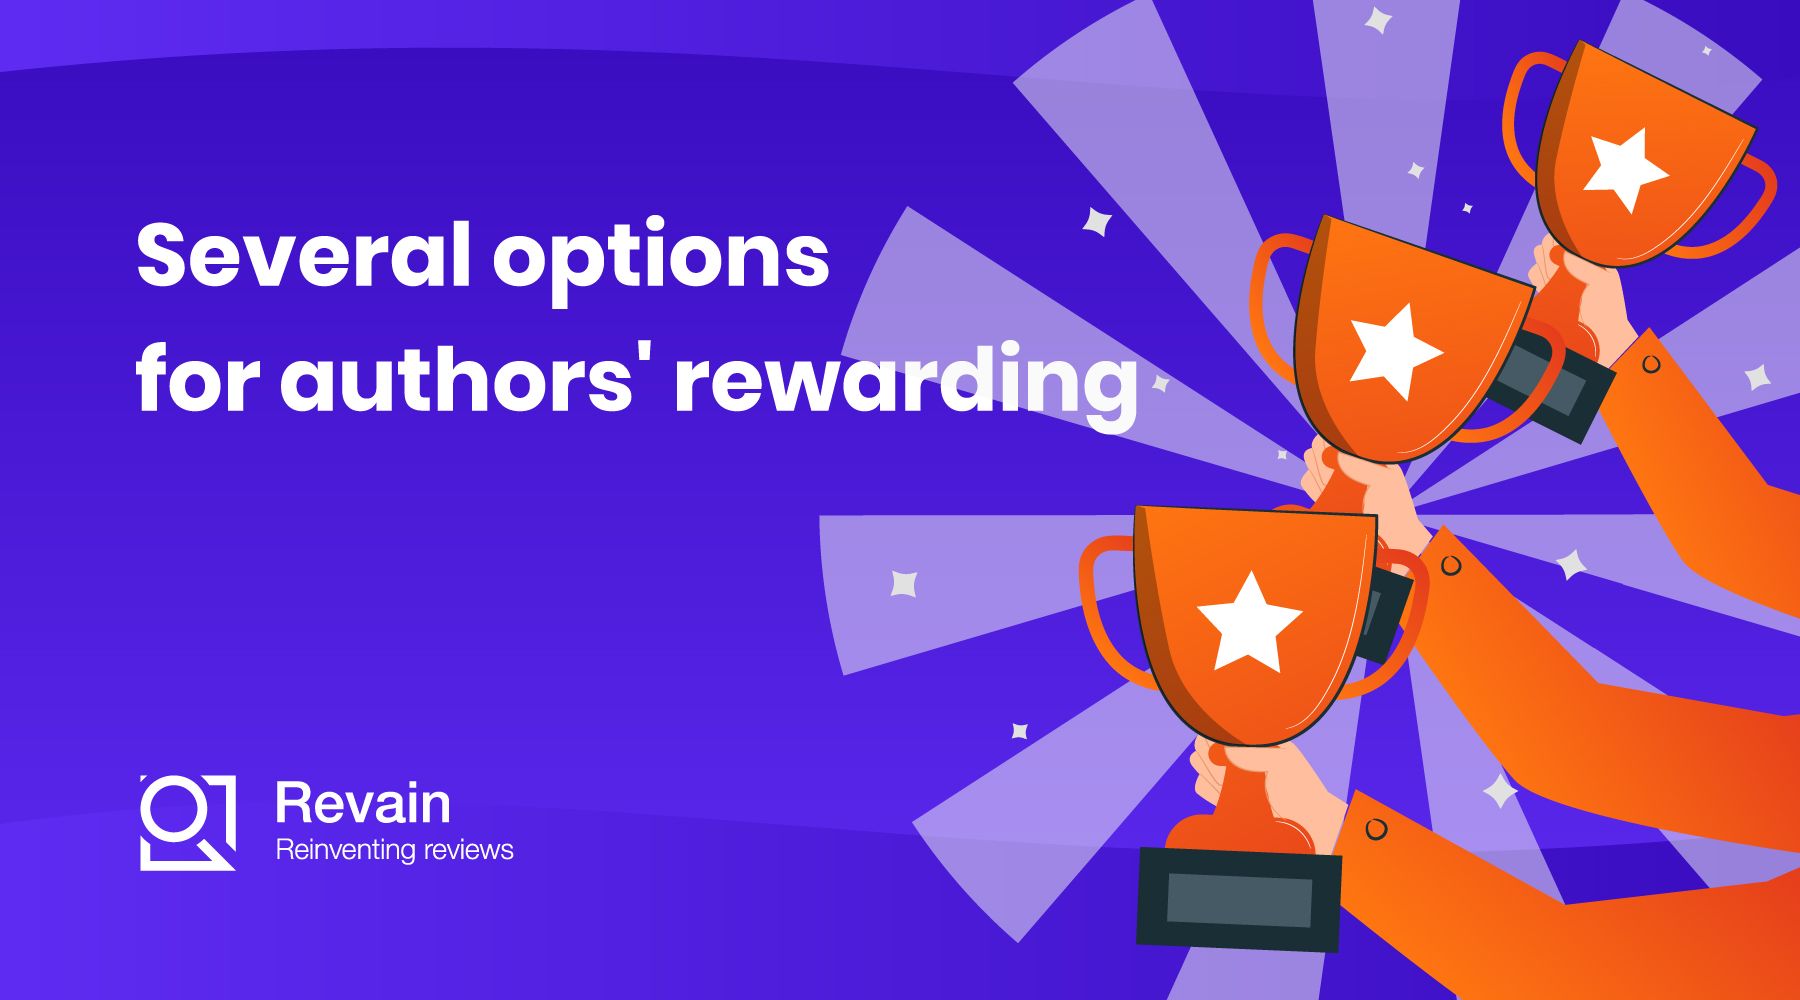 Article Several options for authors' rewarding